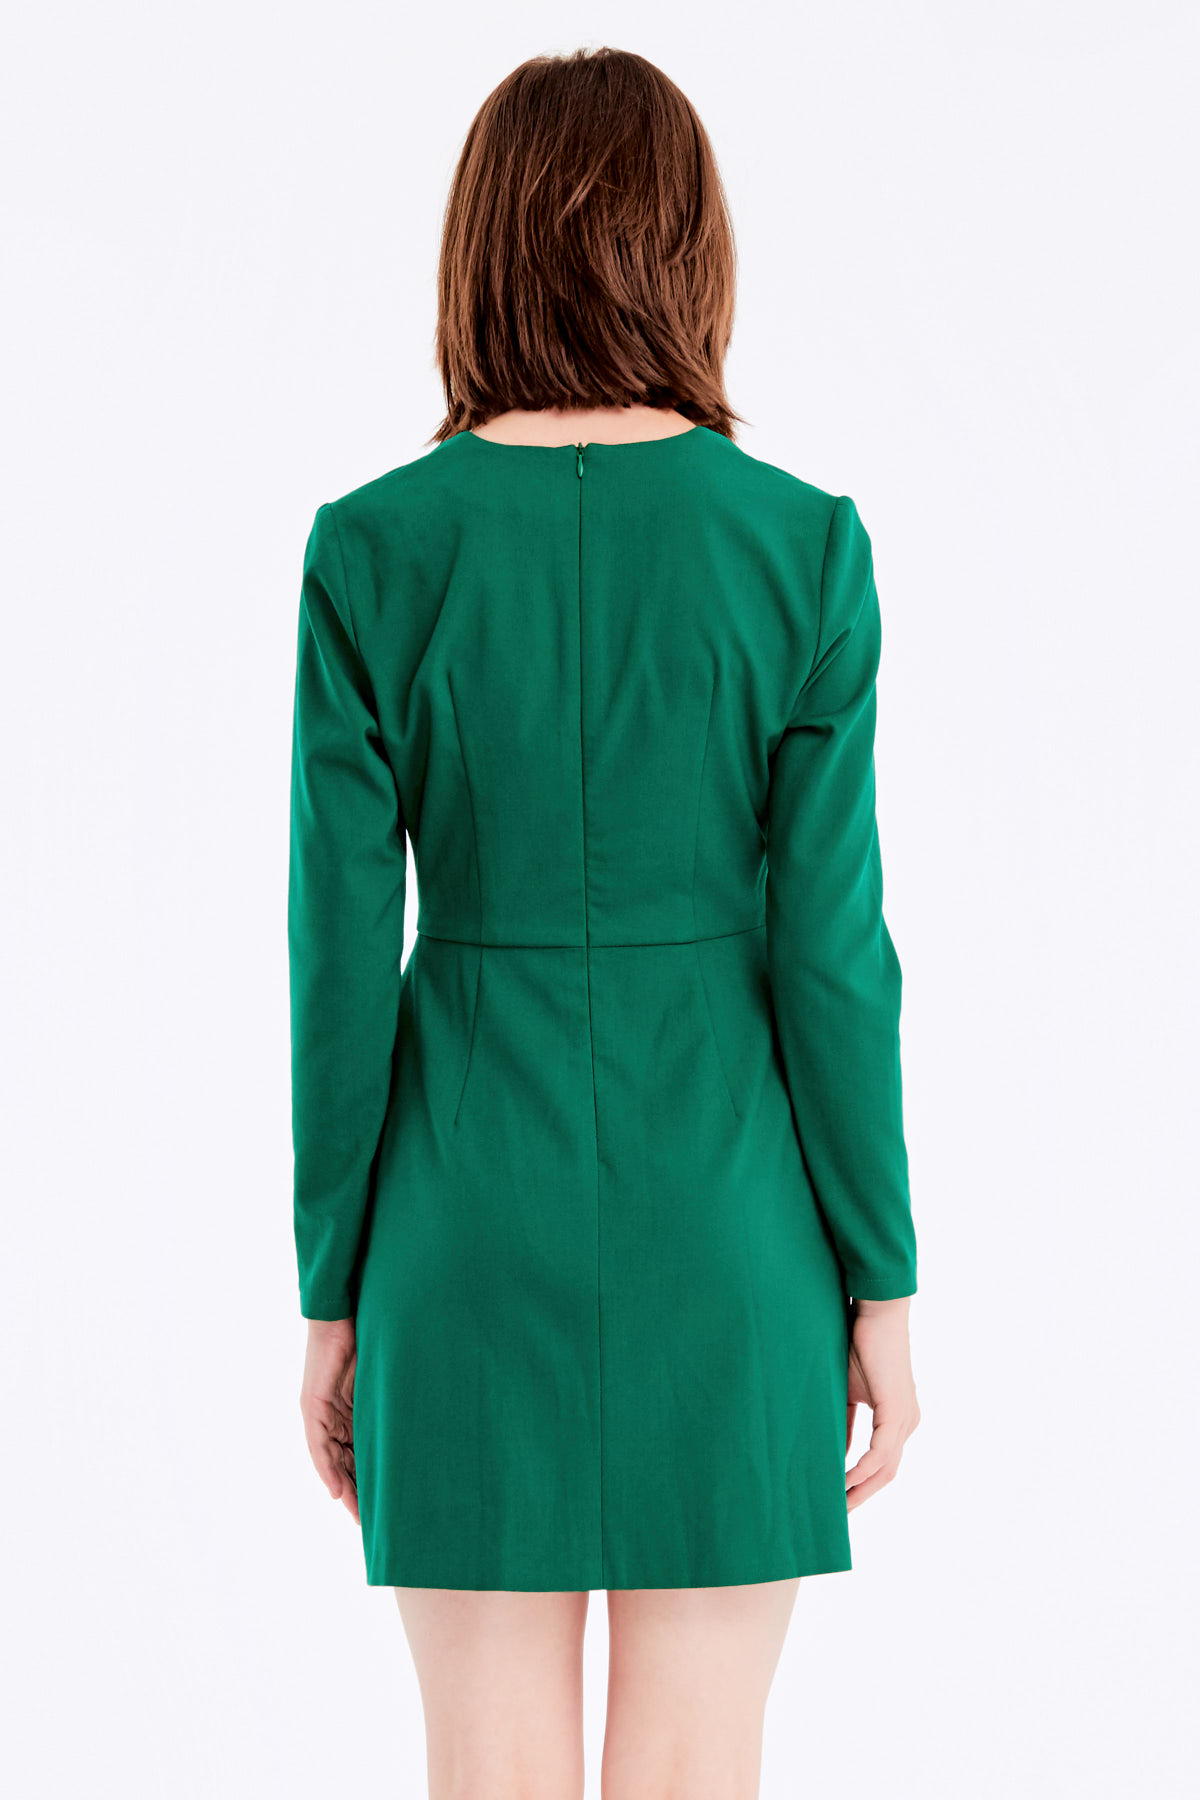 Wrap V-neck MustHave green dress , photo 6